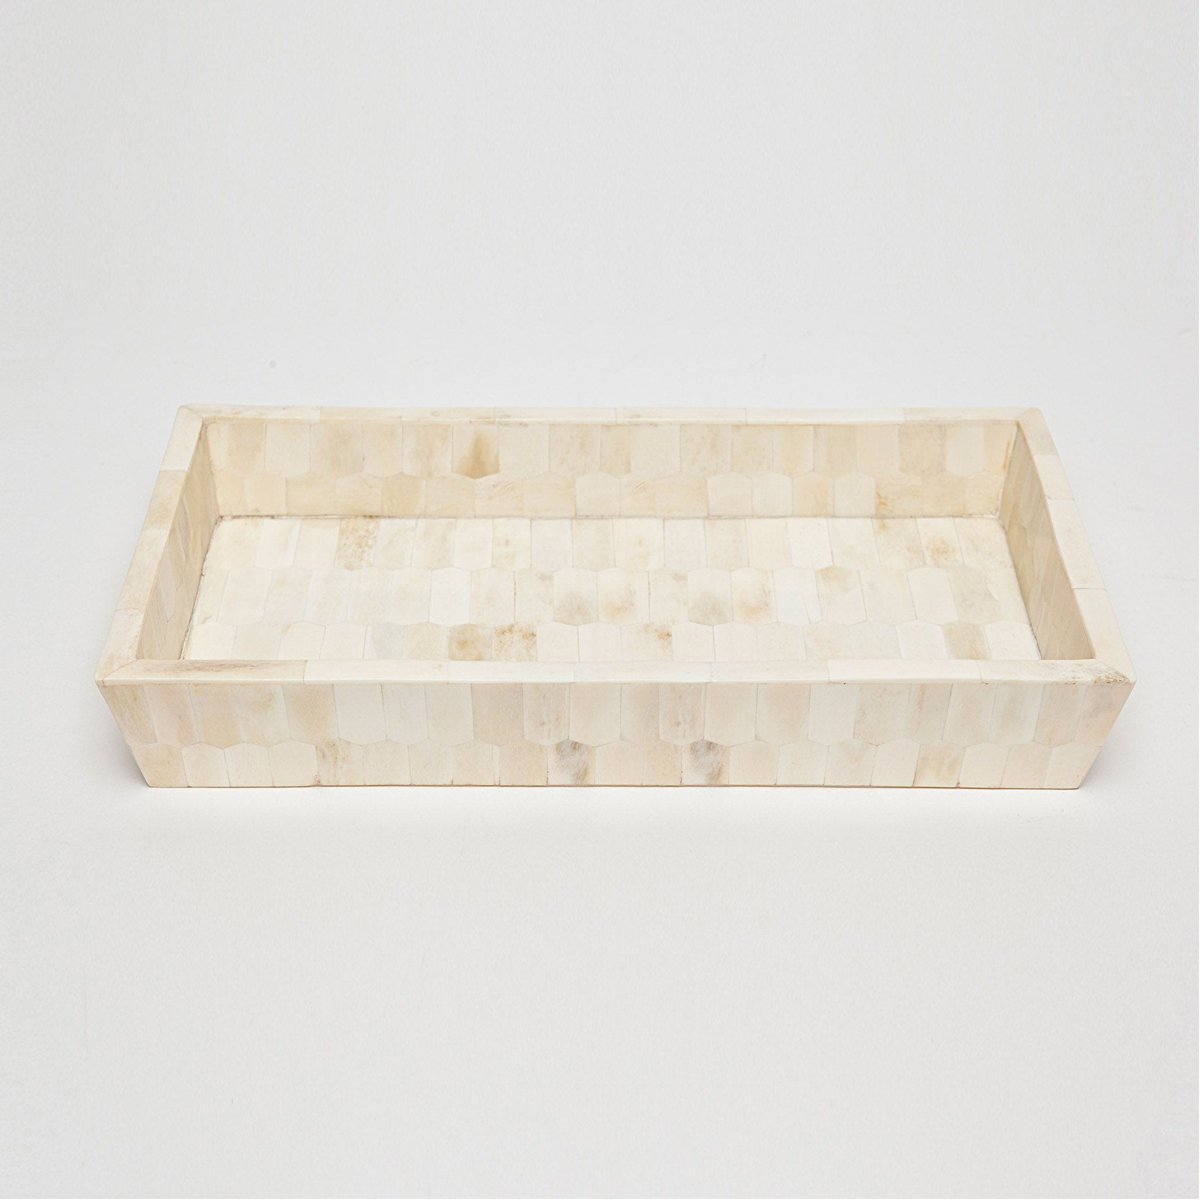 Pigeon and Poodle Jaipur Rectangular Tray, Tapered